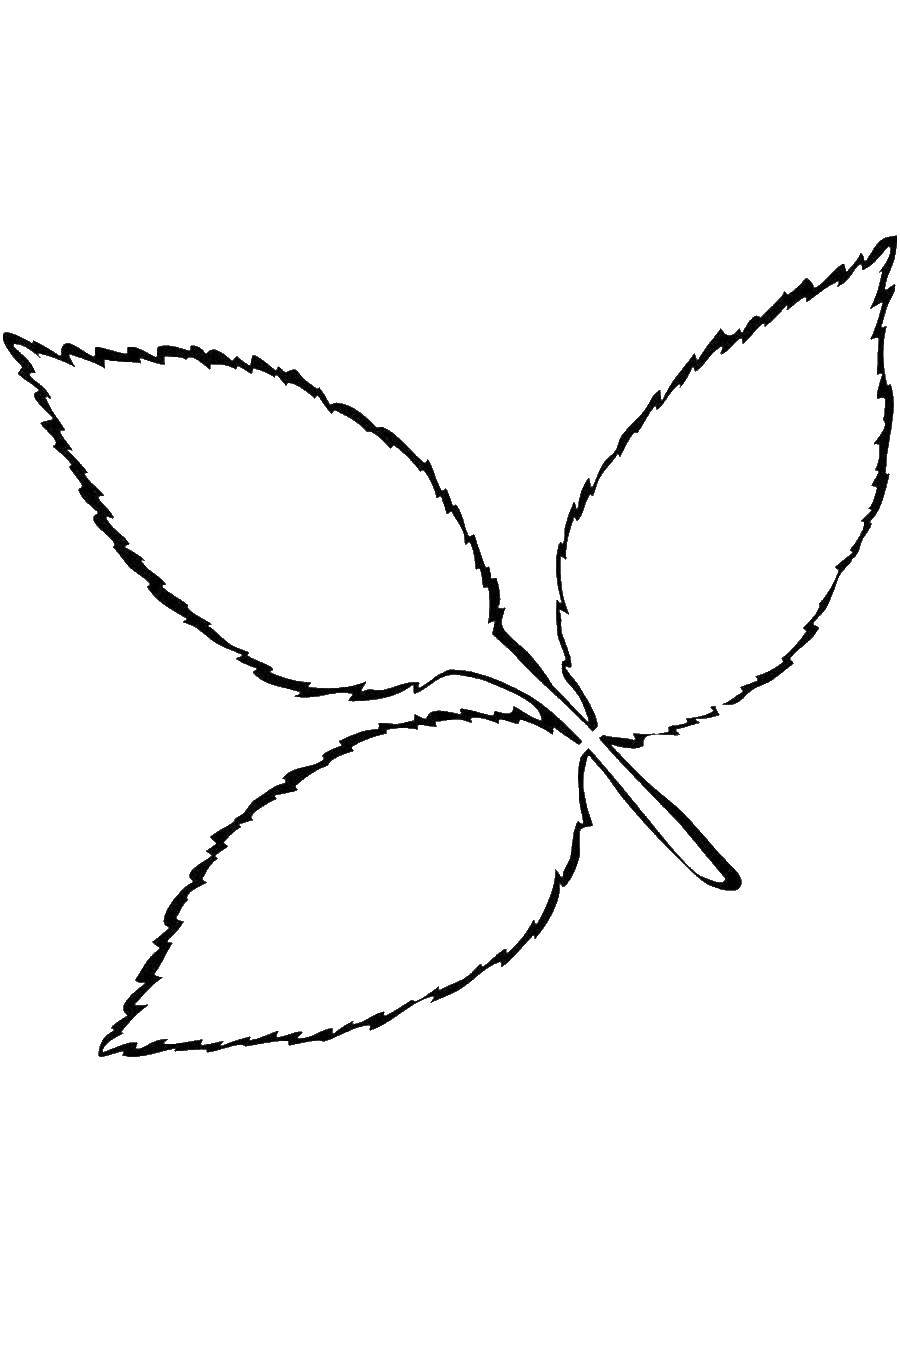 Coloring Twig with leaves. Category leaves. Tags:  Trees, leaf.